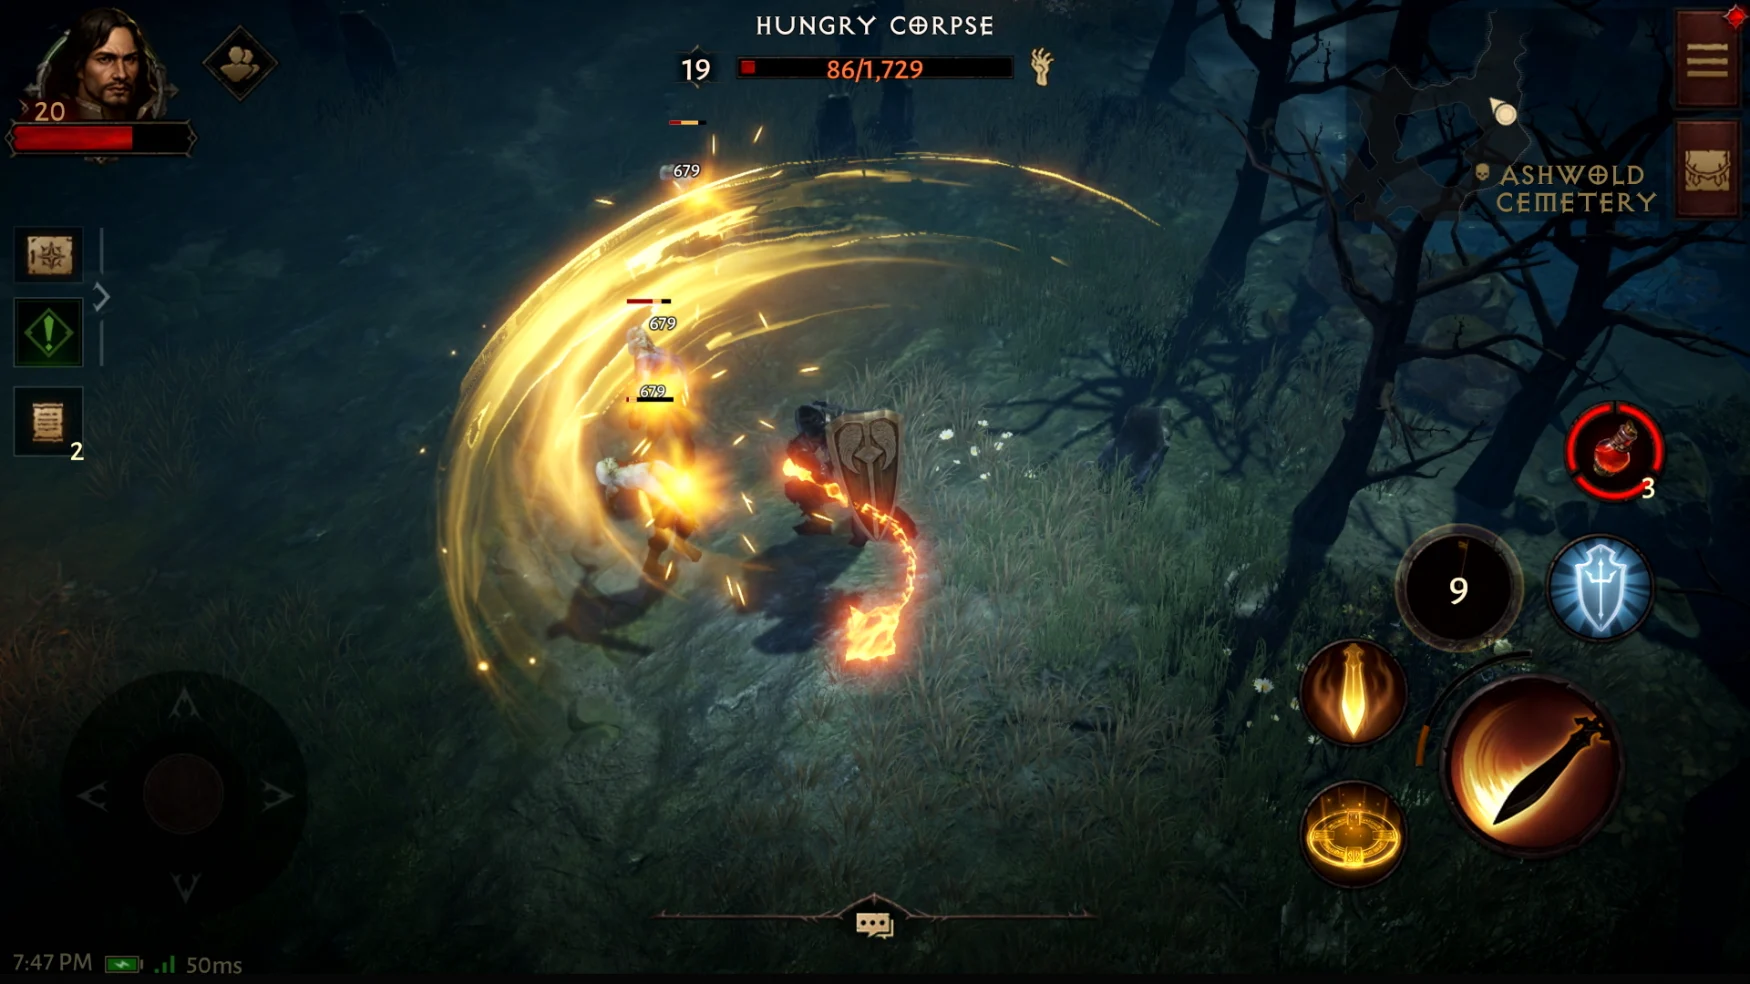 Screenshot of Crusader class using his abilities to slay zombies in the game's Ashwold Cemetery zone.